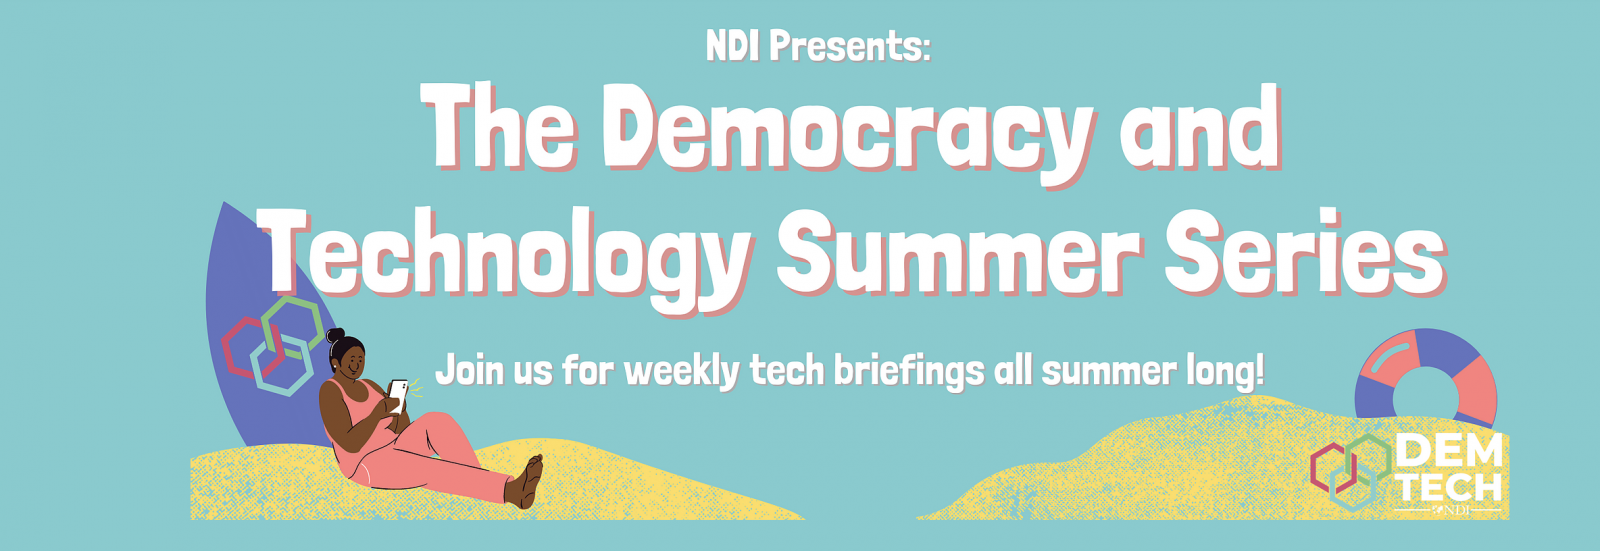 Join Us For NDI Tech Democracy & Technology Summer Series.